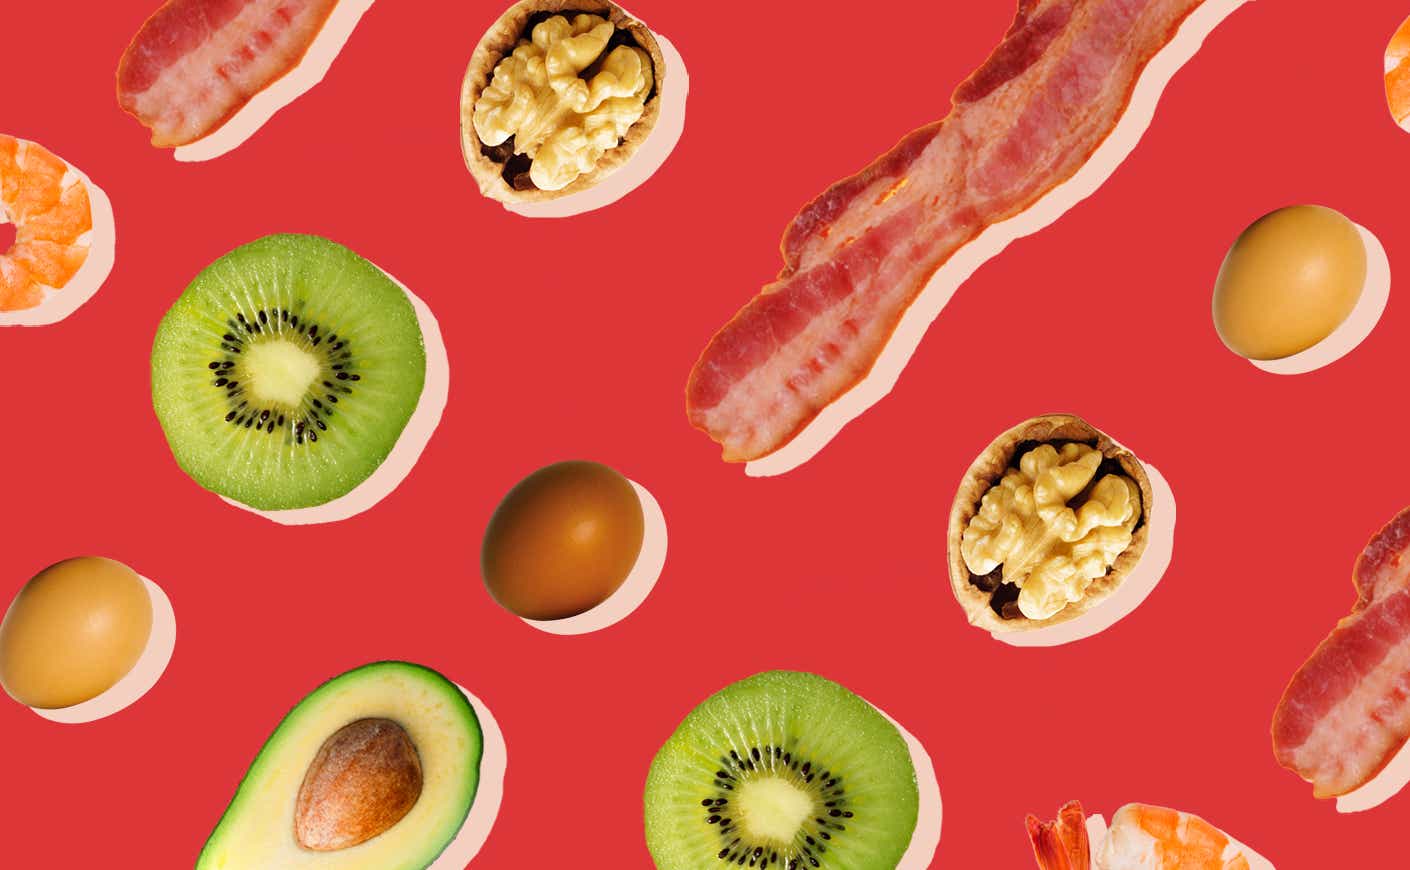 Images of keto foods (eggs, walnuts, bacon, and kiwi slices) float in front of a red background.